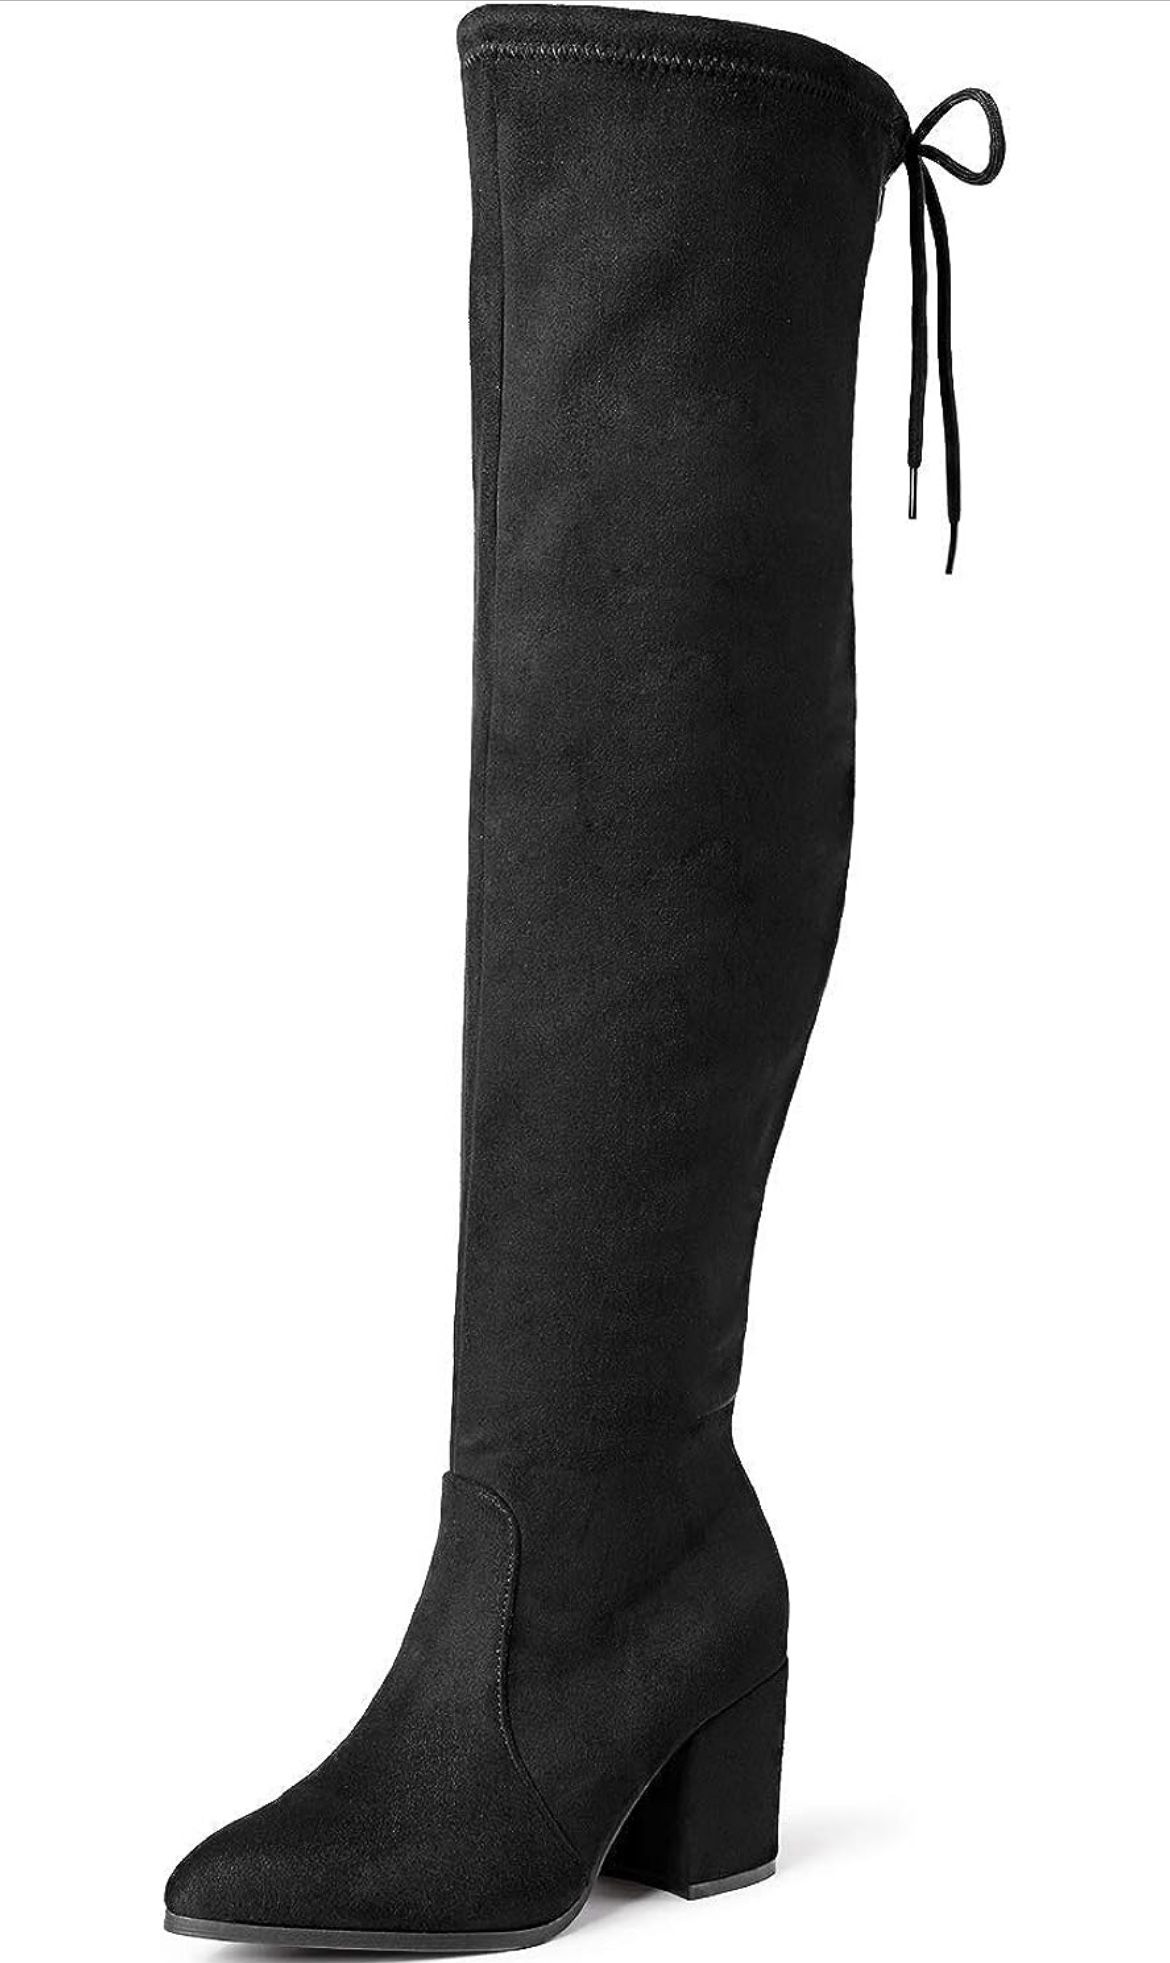 DREAM PAIRS Women’s Thigh High Boots Over the knee Stretch Block Heel Fashion Long Boots